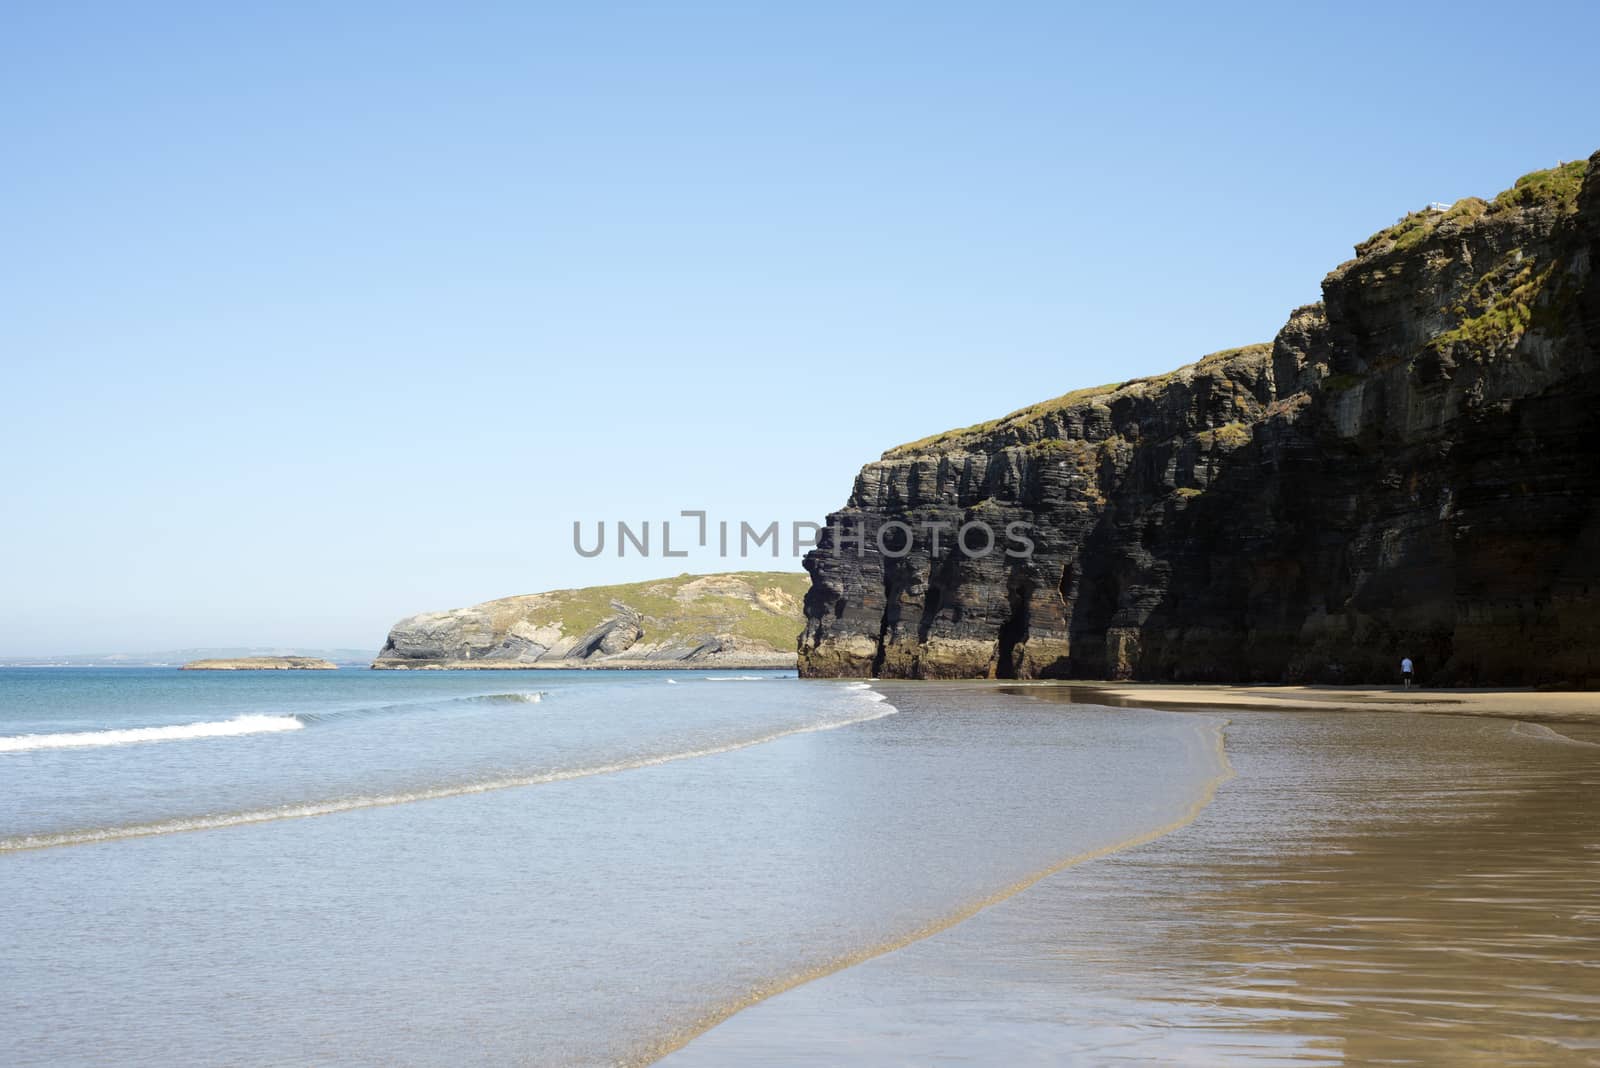 ballybunion beach and cliffs on the wild atlantic way at low tide